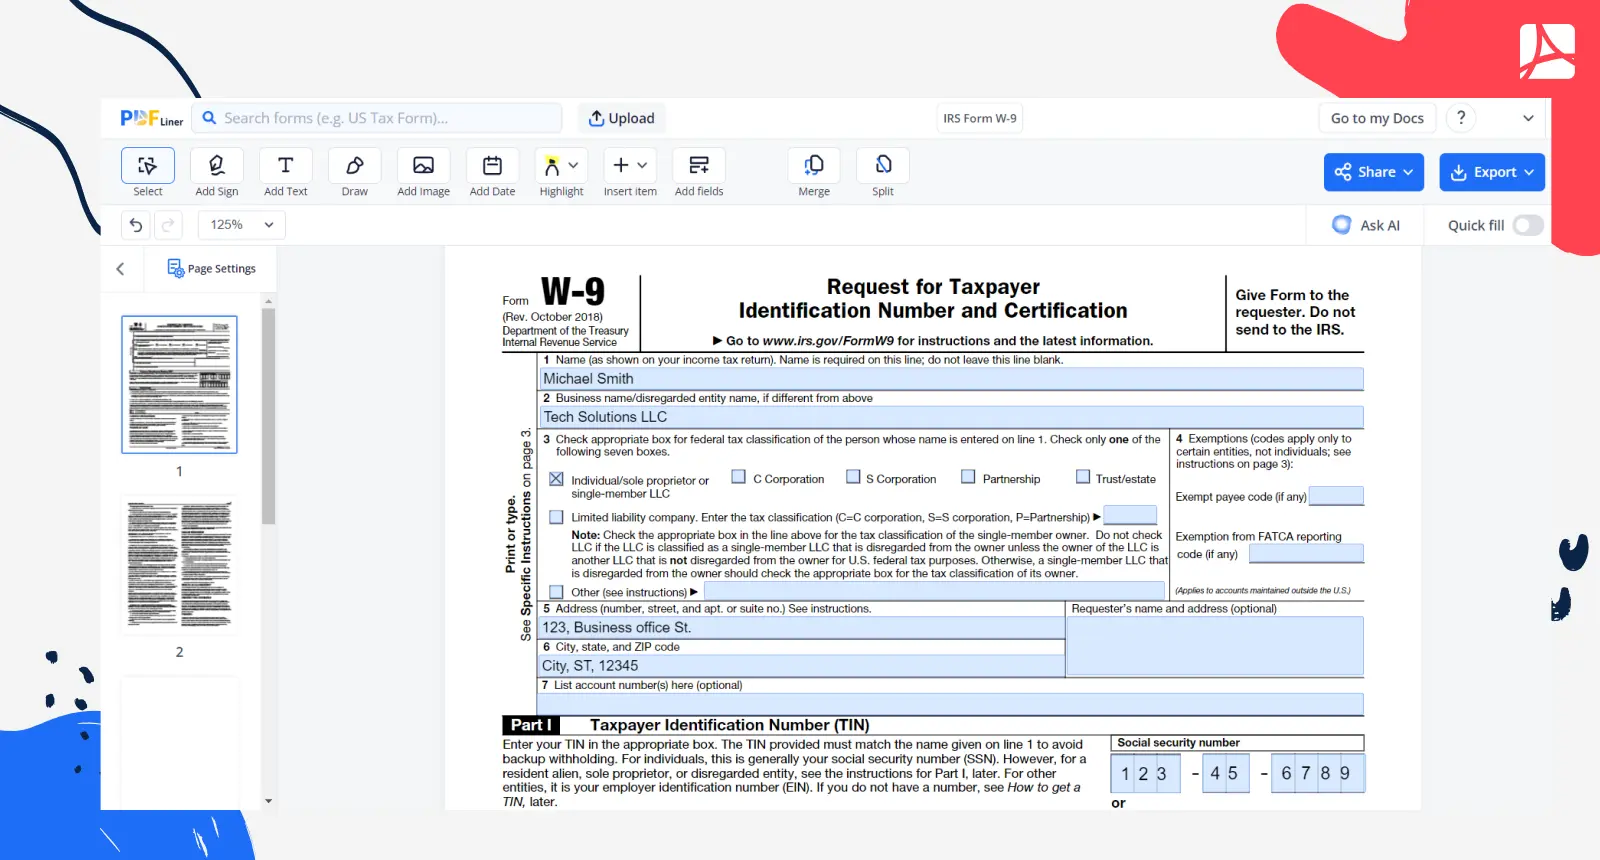 W-9 form example for LLC